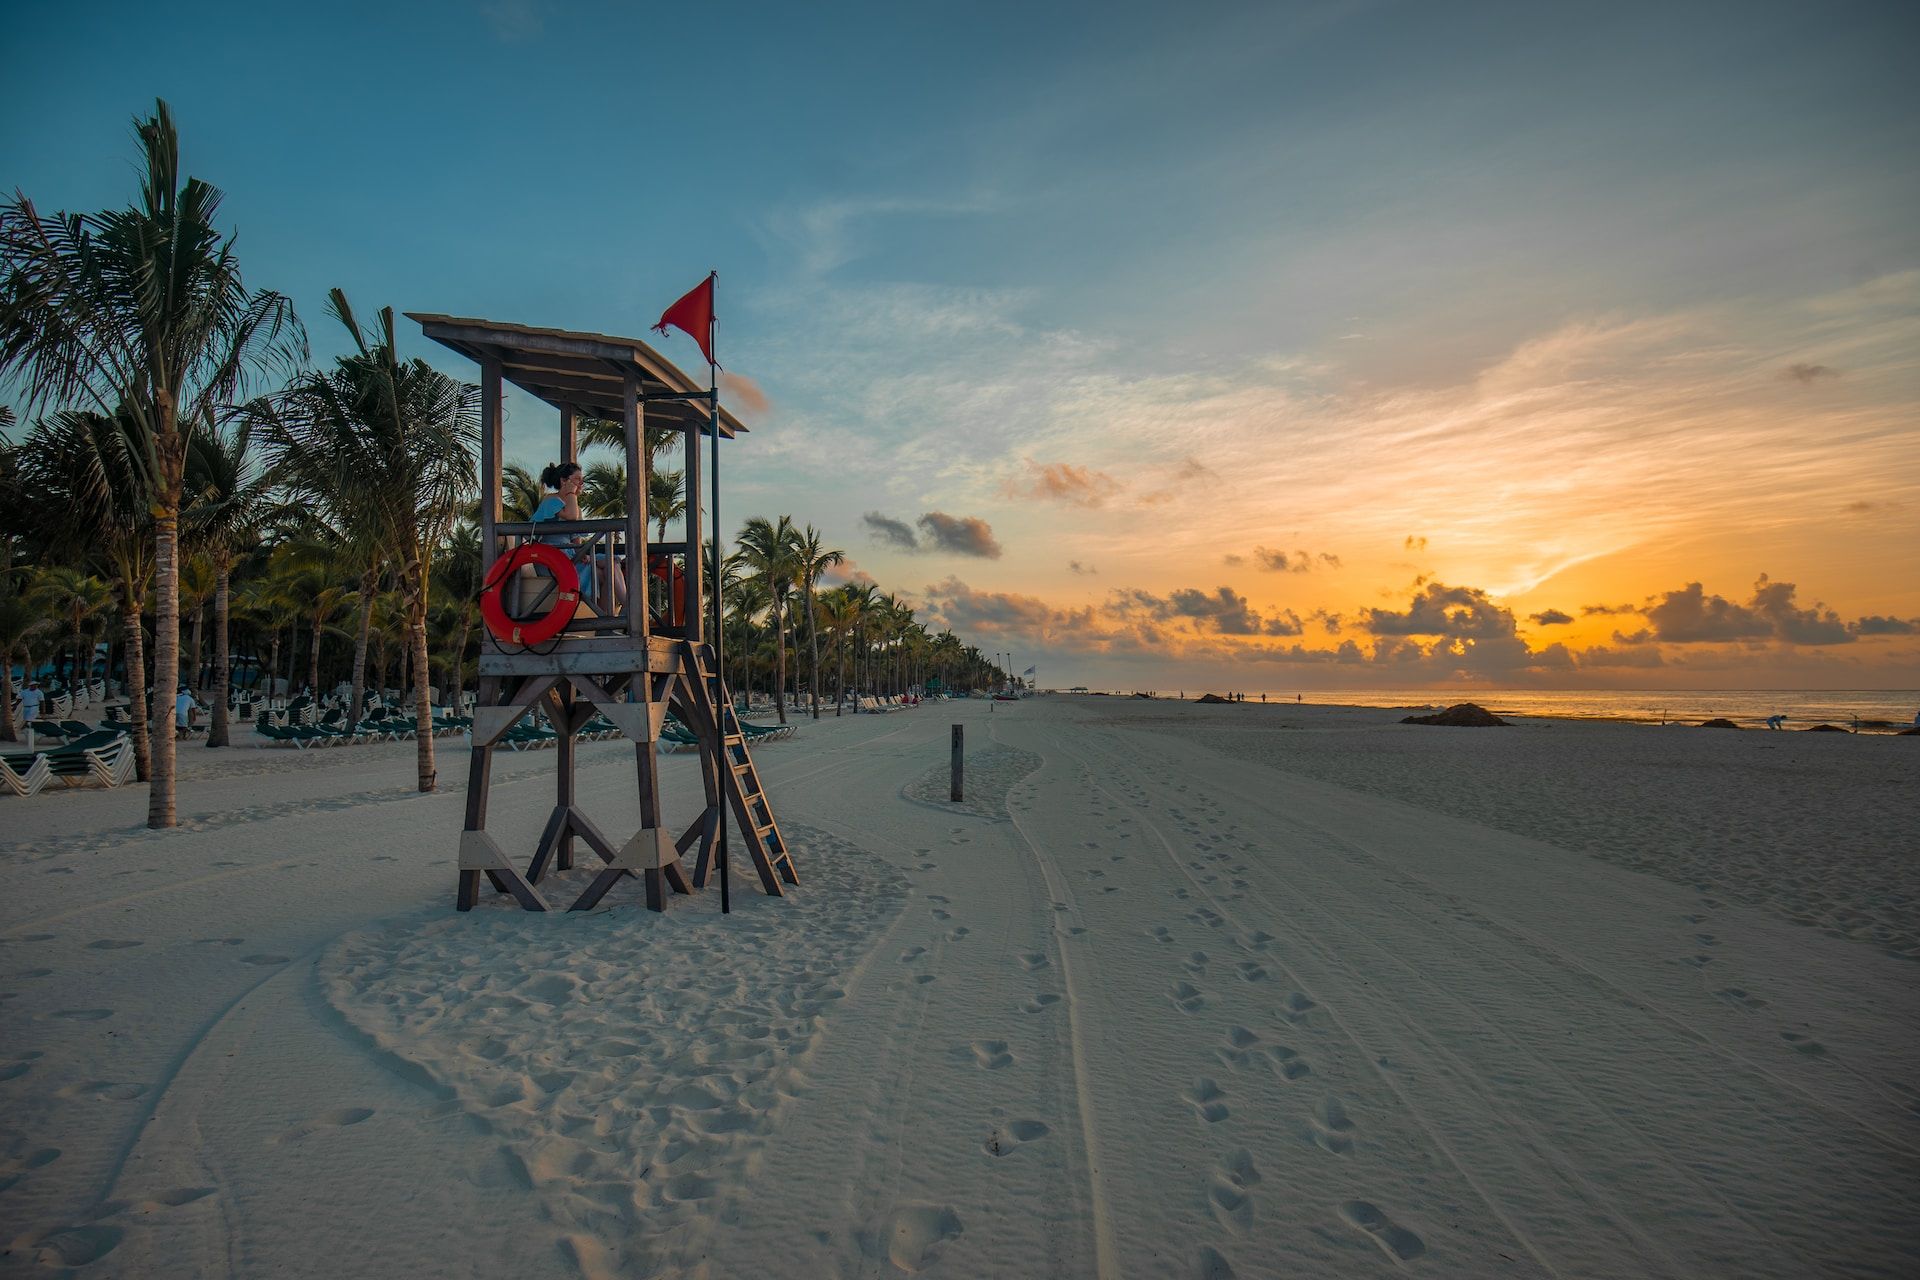 Lifeguard on a tower on the beach in Playa del Carmen at sunset